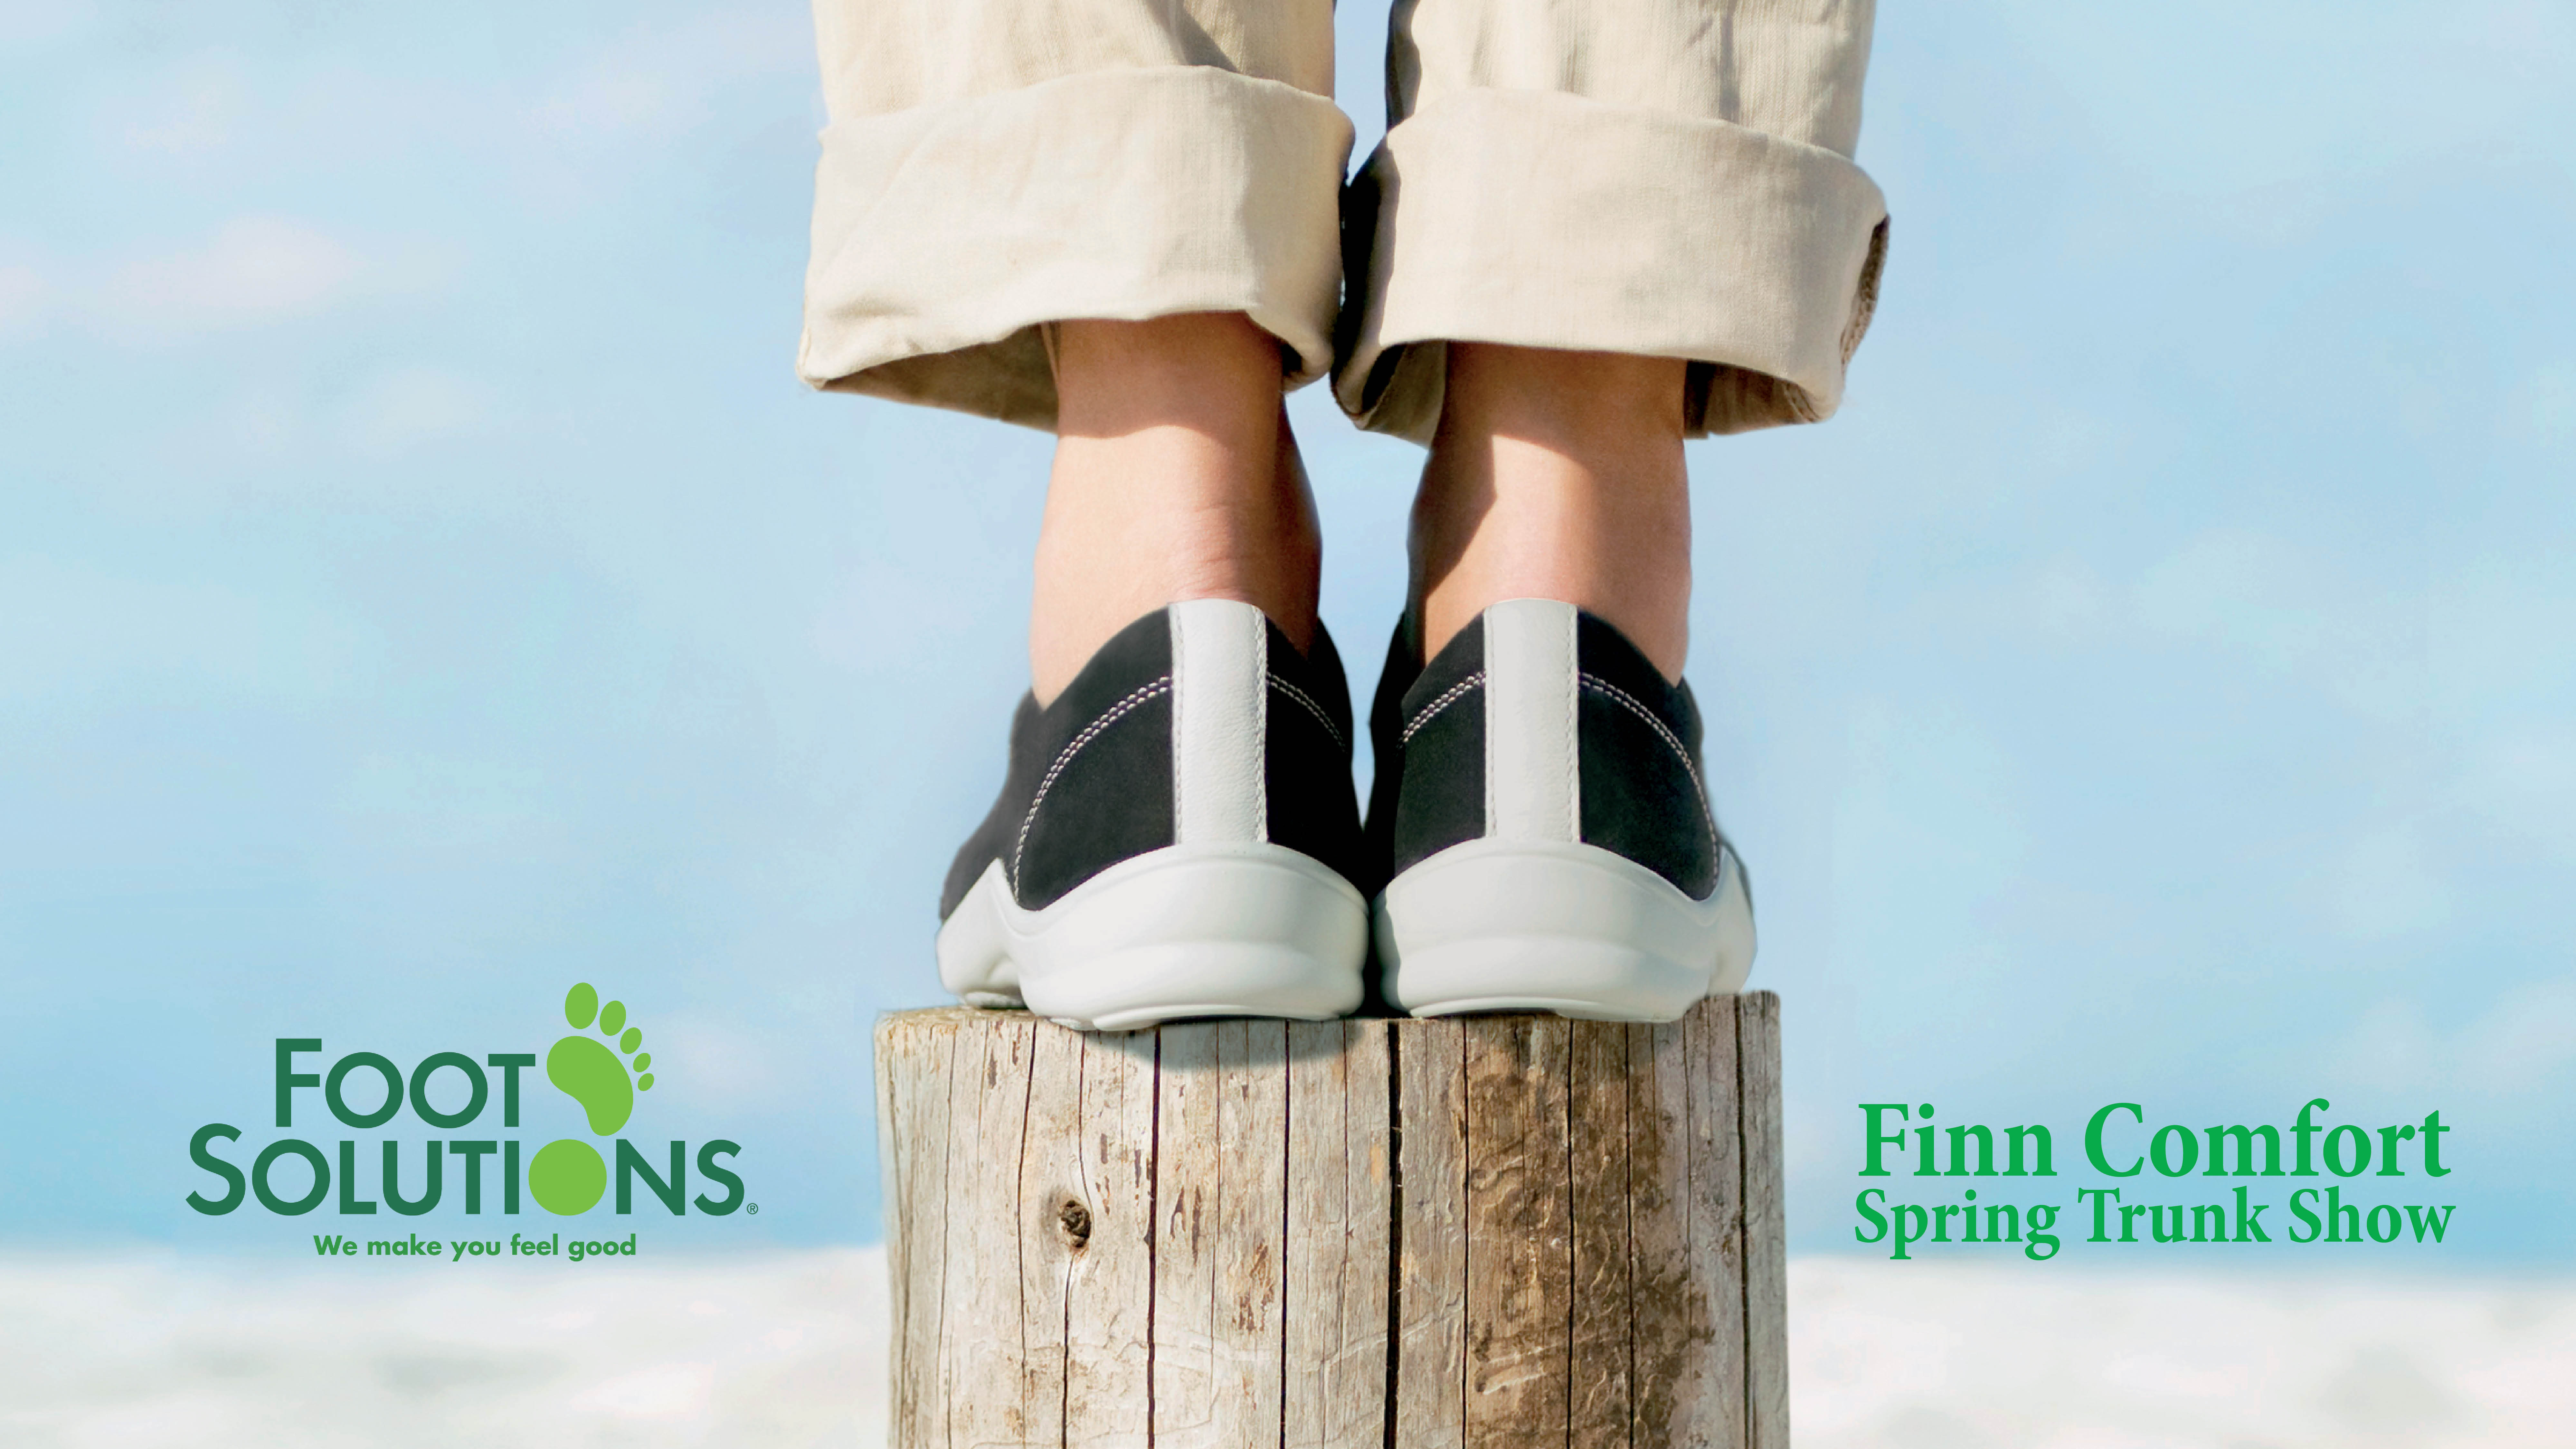 Finn Comfort Trunk Show at Foot Solutions of East Cobb